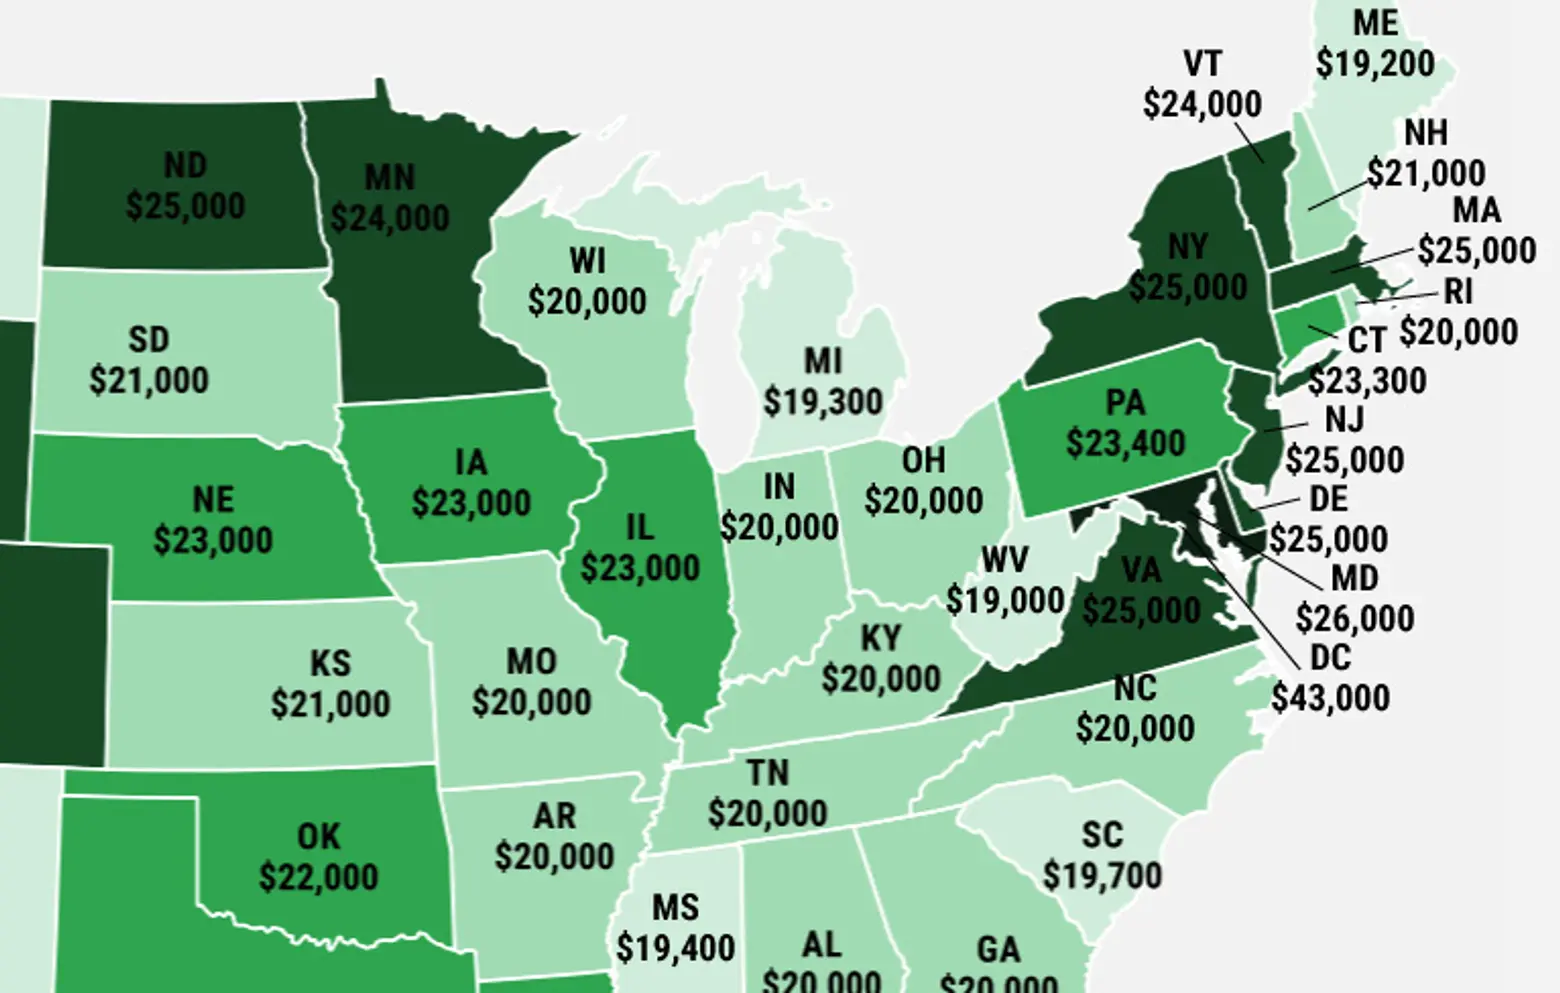 Mapping the Depressing Annual Salaries of Millennials Across the U.S.